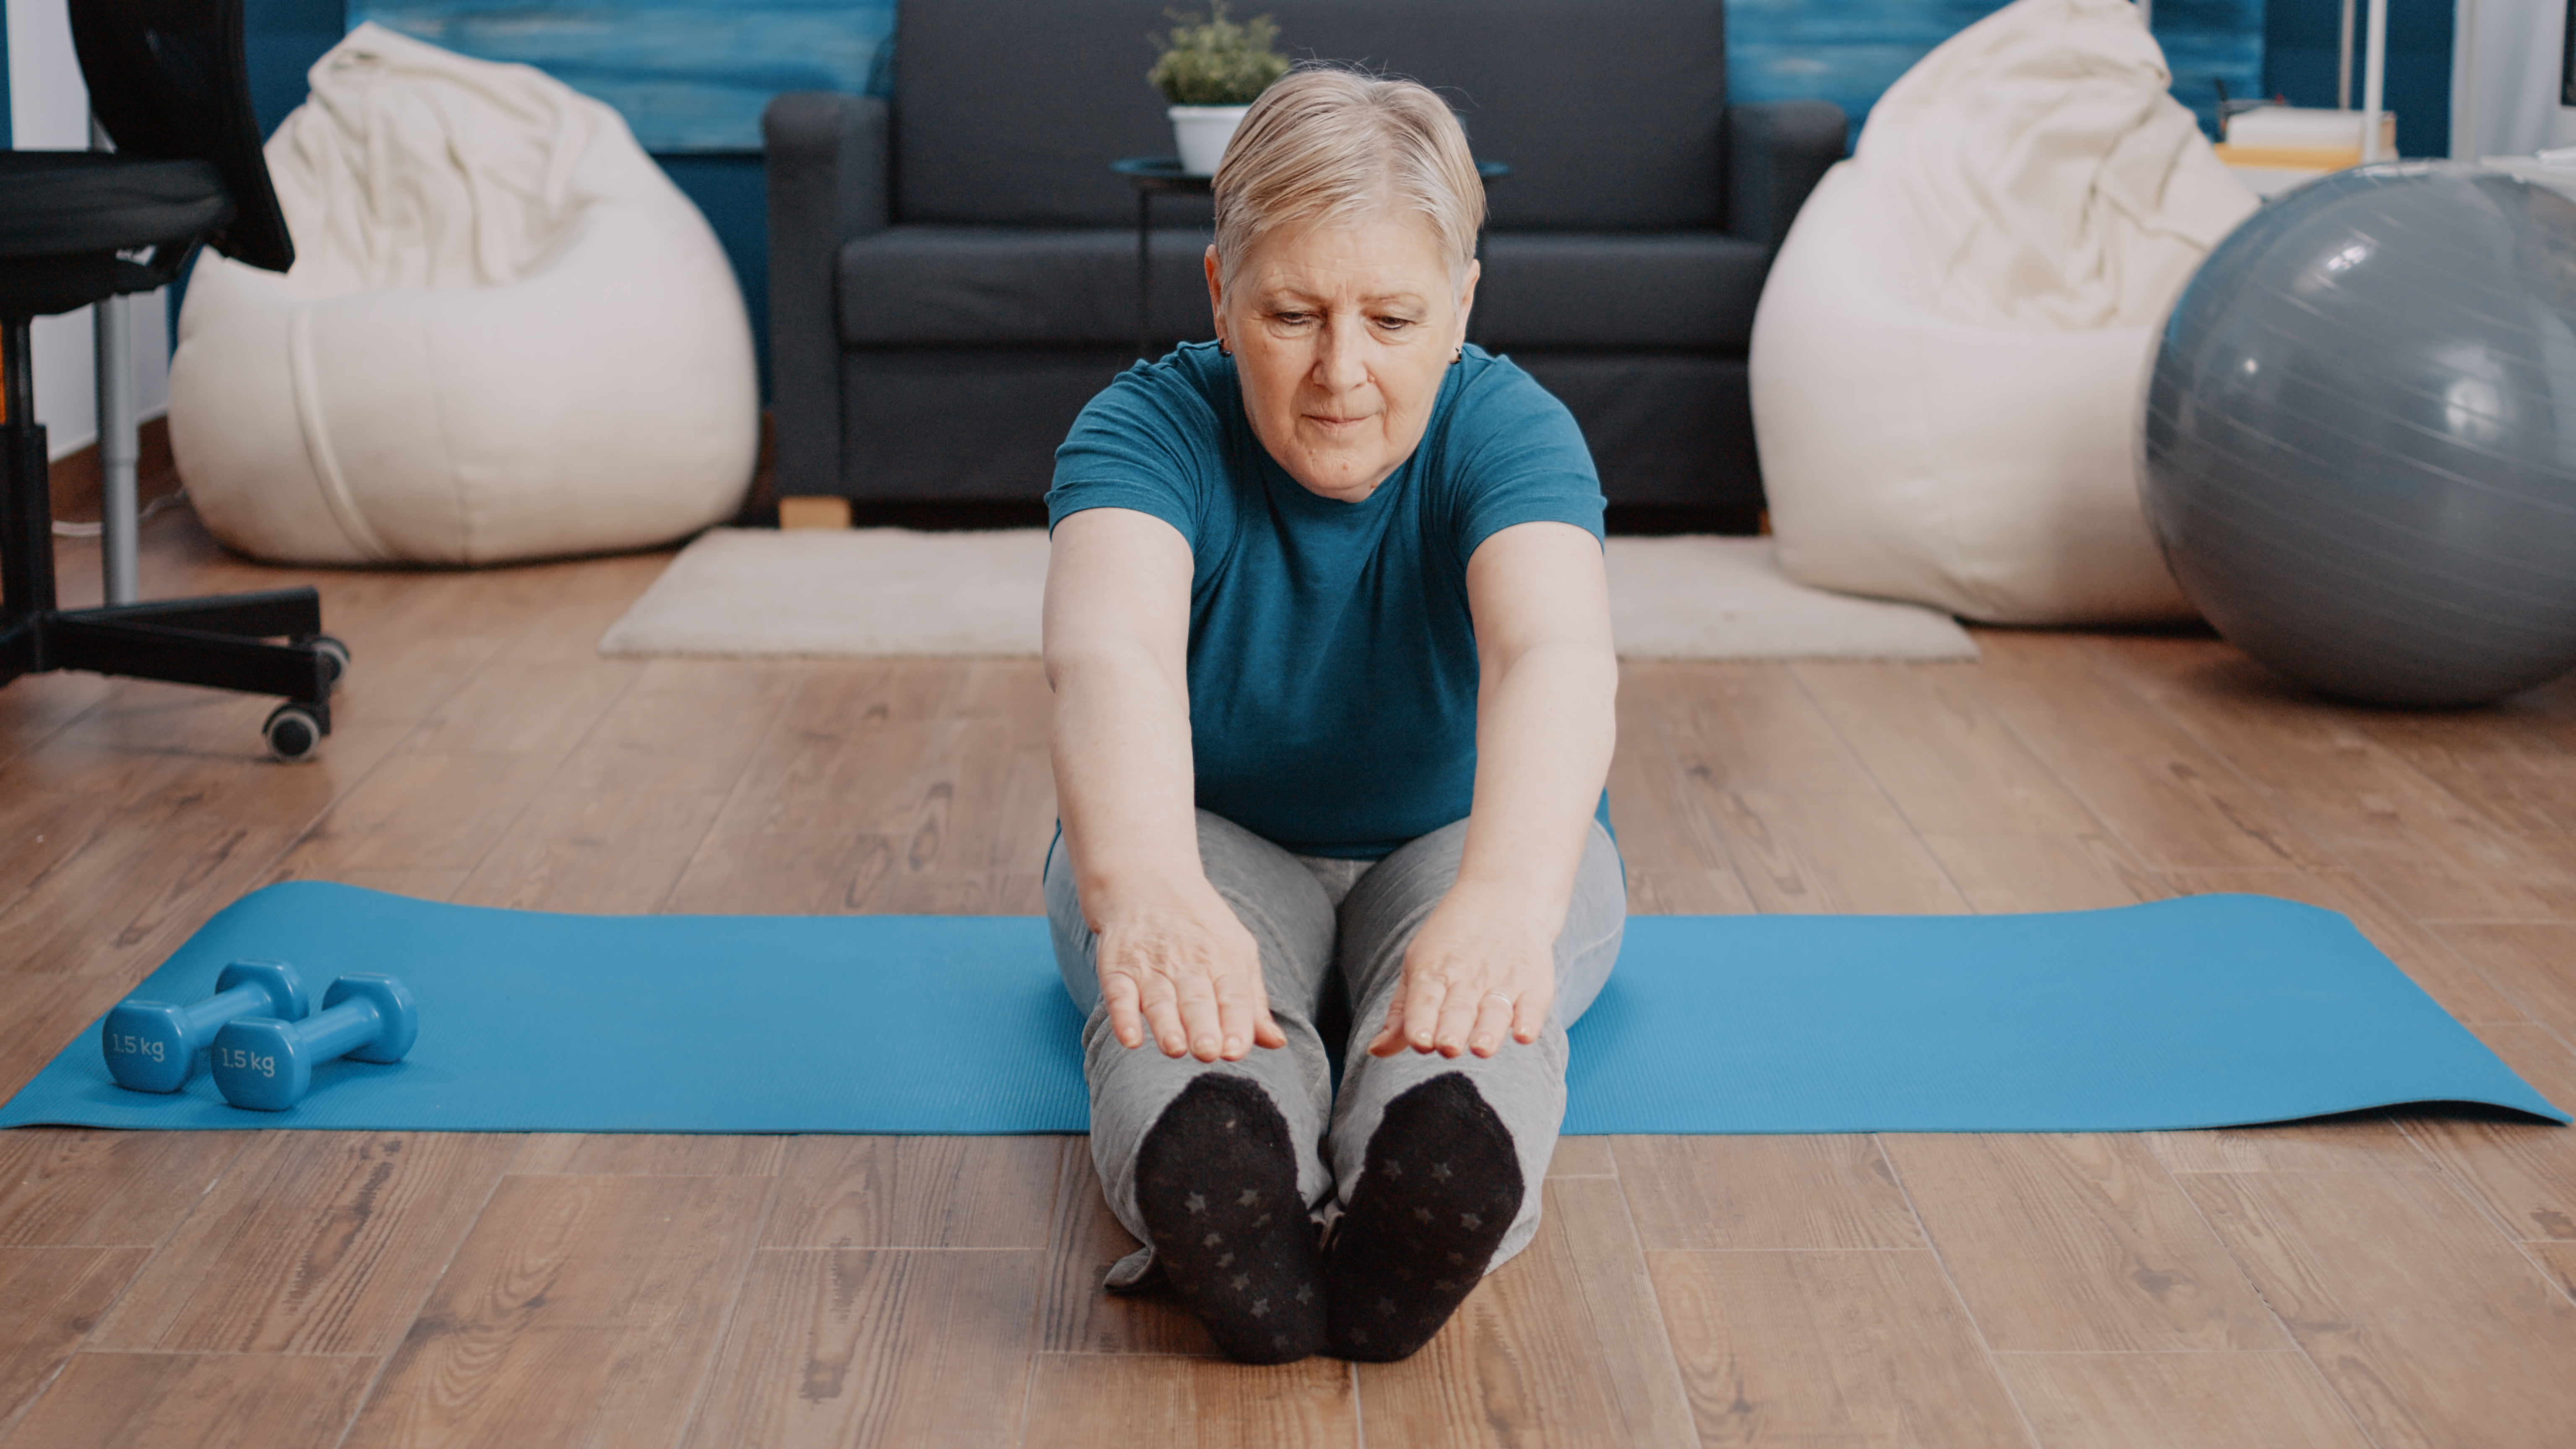 Senior woman stretching in aerobics position on yoga mat. Aged person doing physical exercise and training for wellness and healthcare. Pensioner doing gymnastics workout at home.